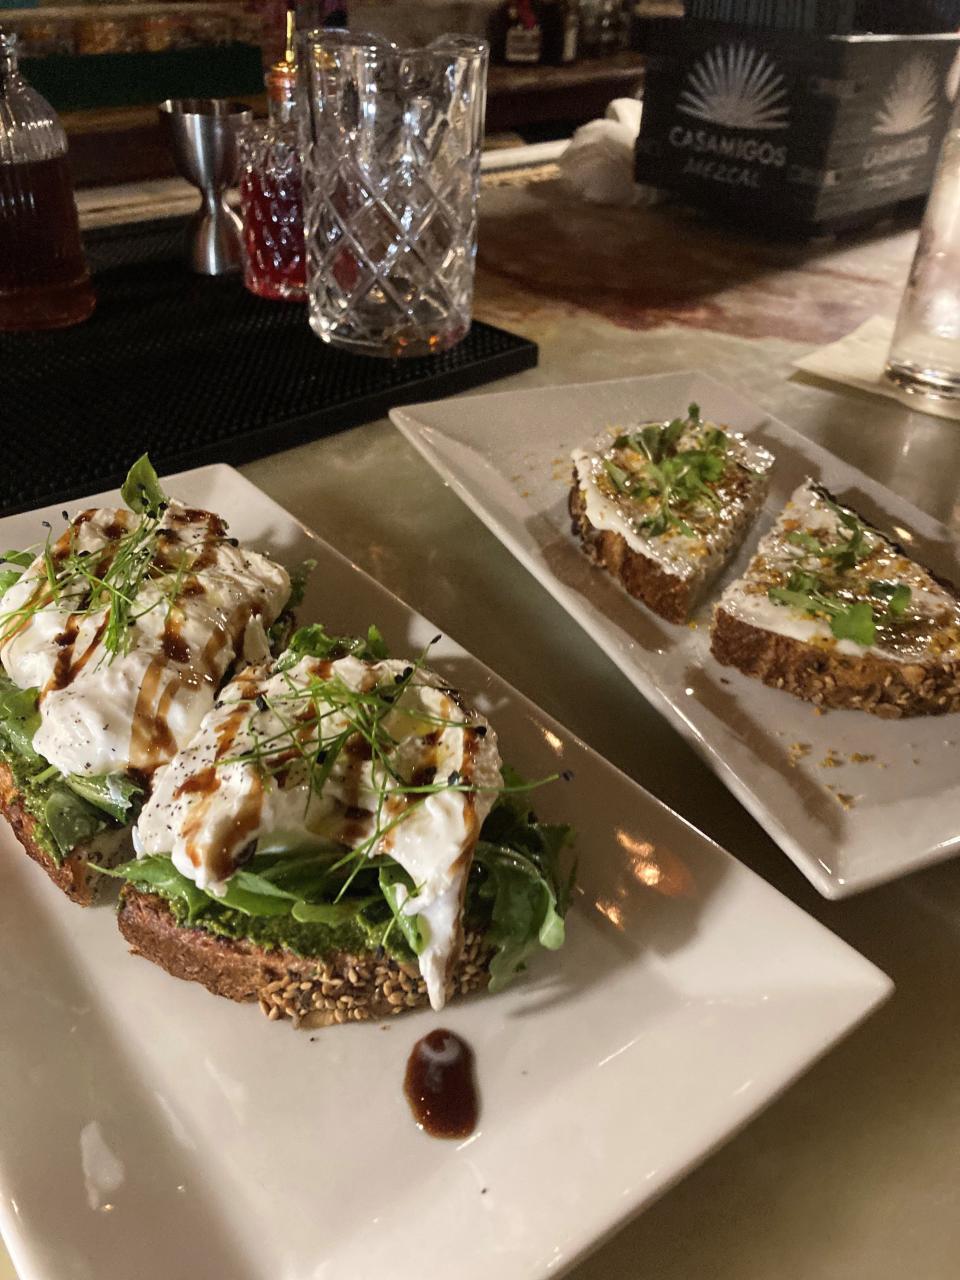 Some of the food items on The Raconteur menu in Pleasantville include burrata bruschetta, on left and Labne toast,  right, with truffle honey, bee pollen, za'atar, and micro cilantro. Photographed Dec. 6, 2022